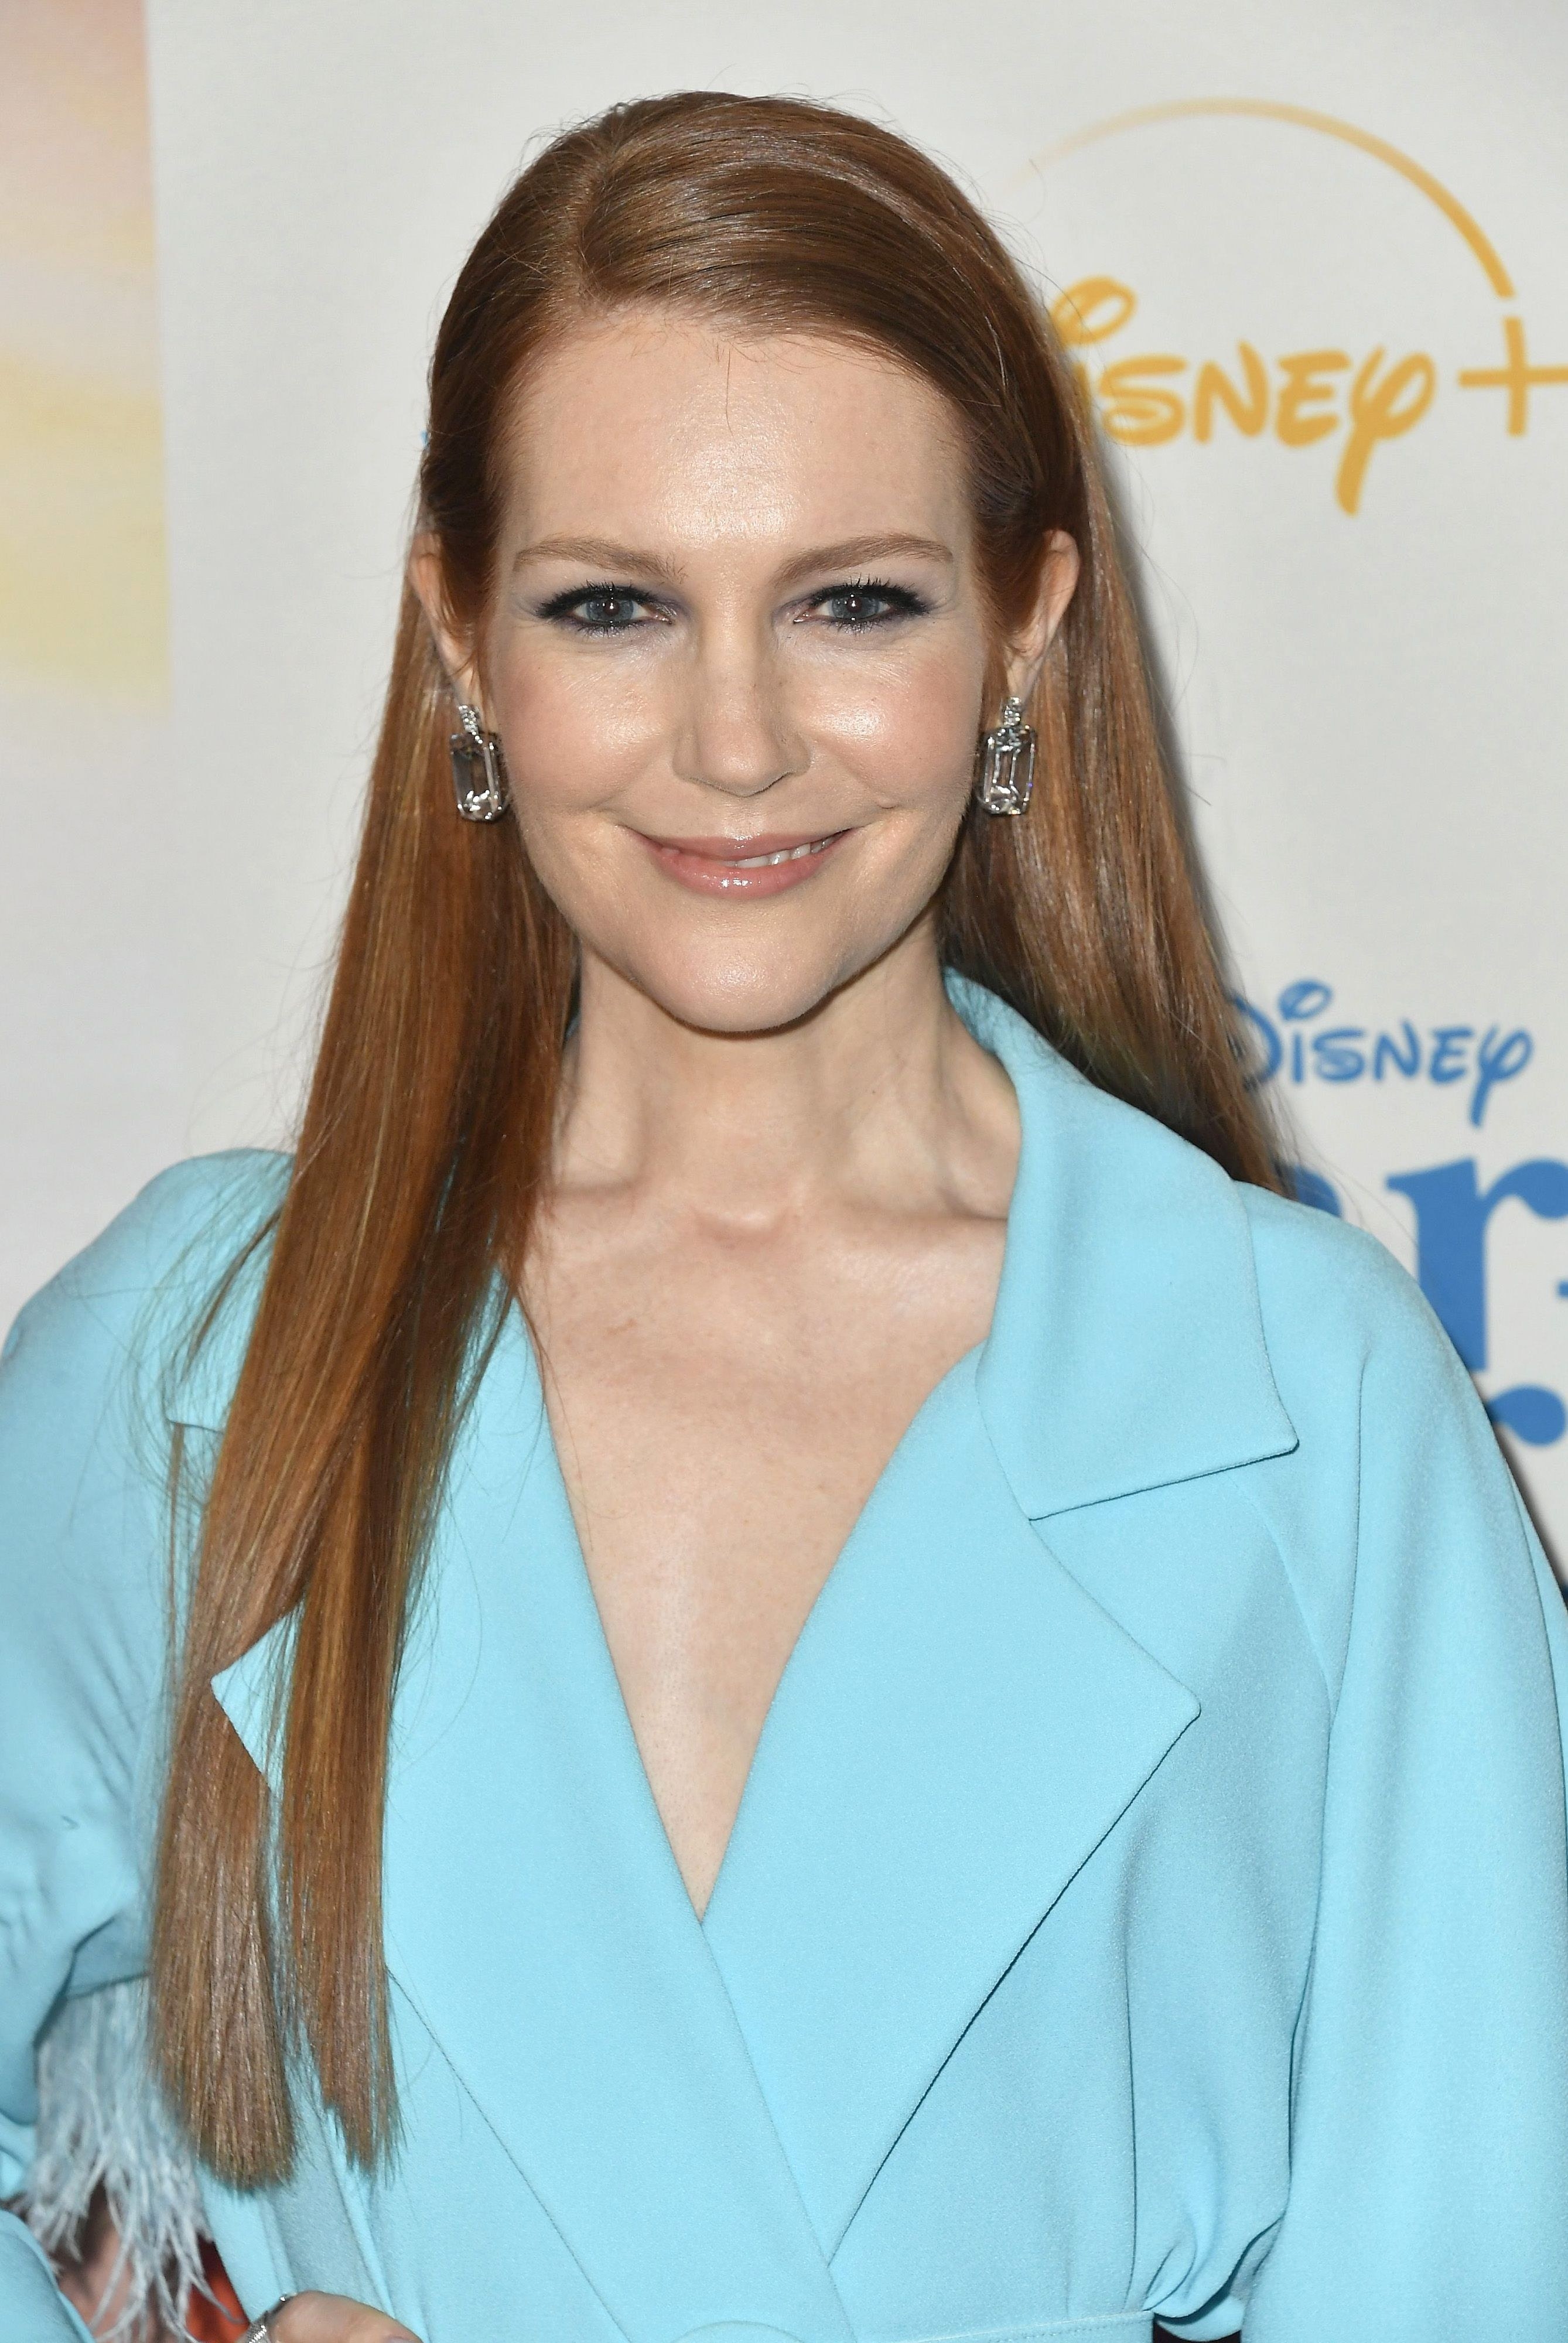 Darby Stanchfield on the red carpet